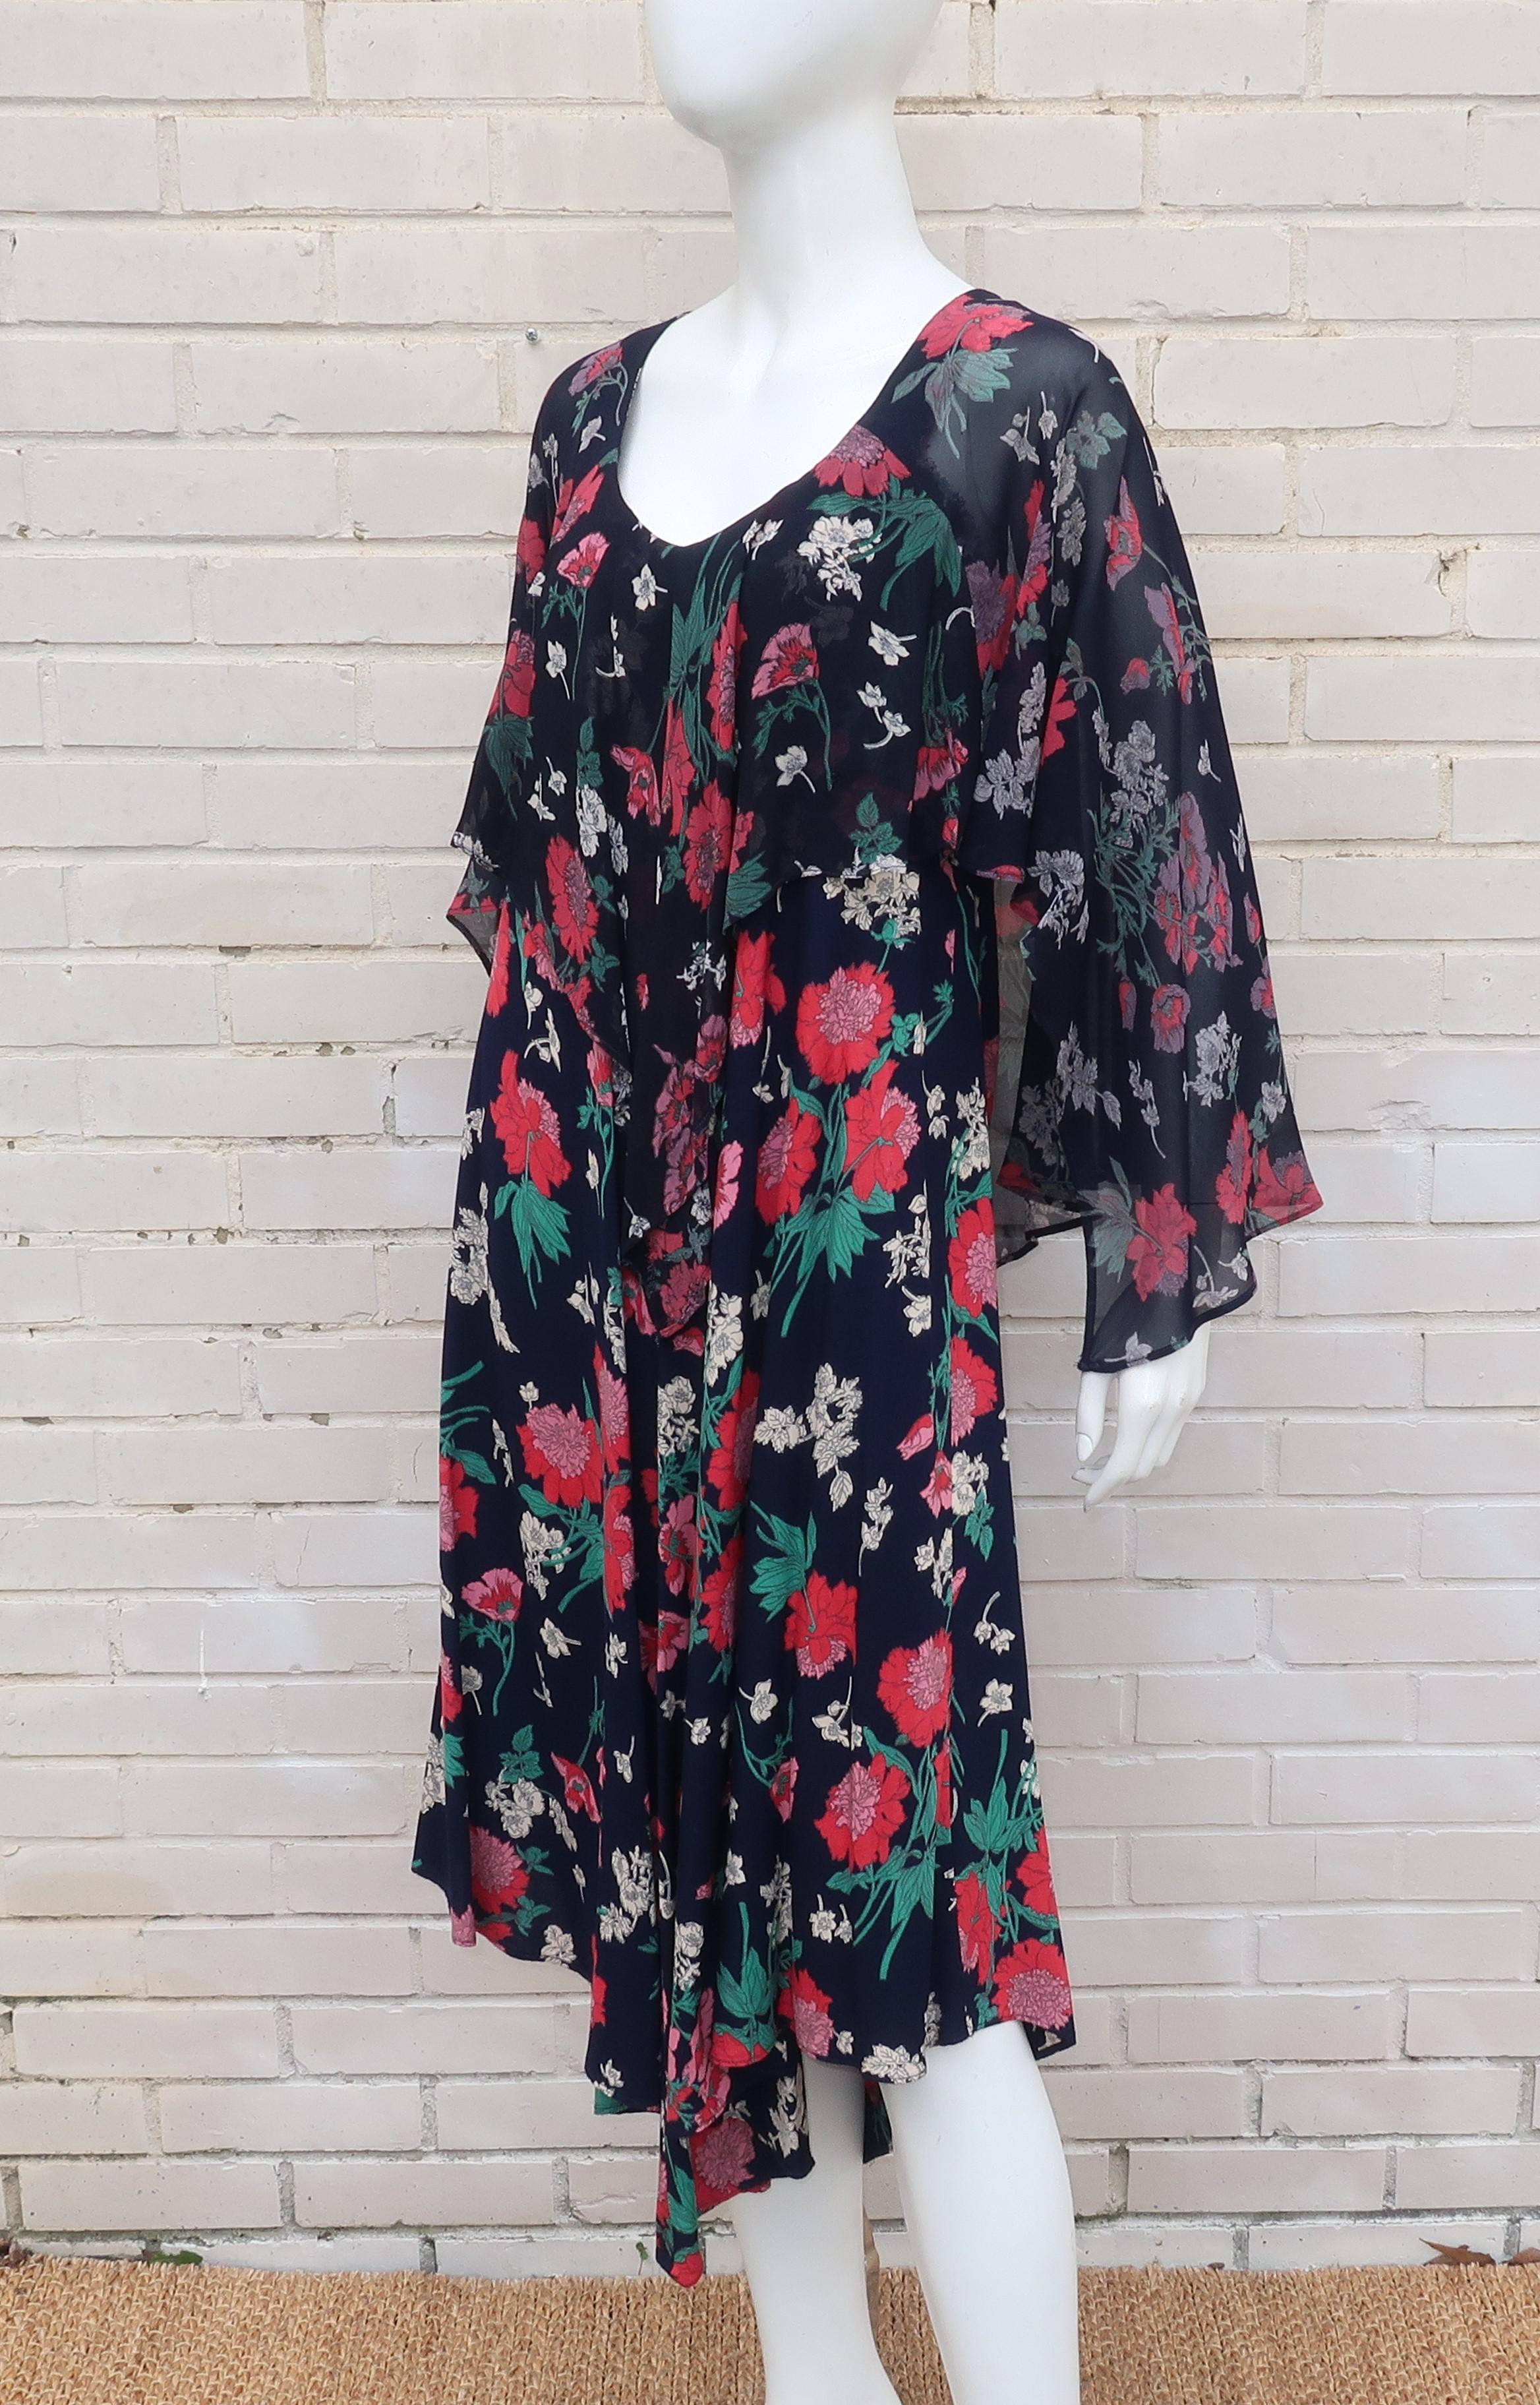 Early Nicole Miller 1970's Floral Bohemian Dress With Overlay  5